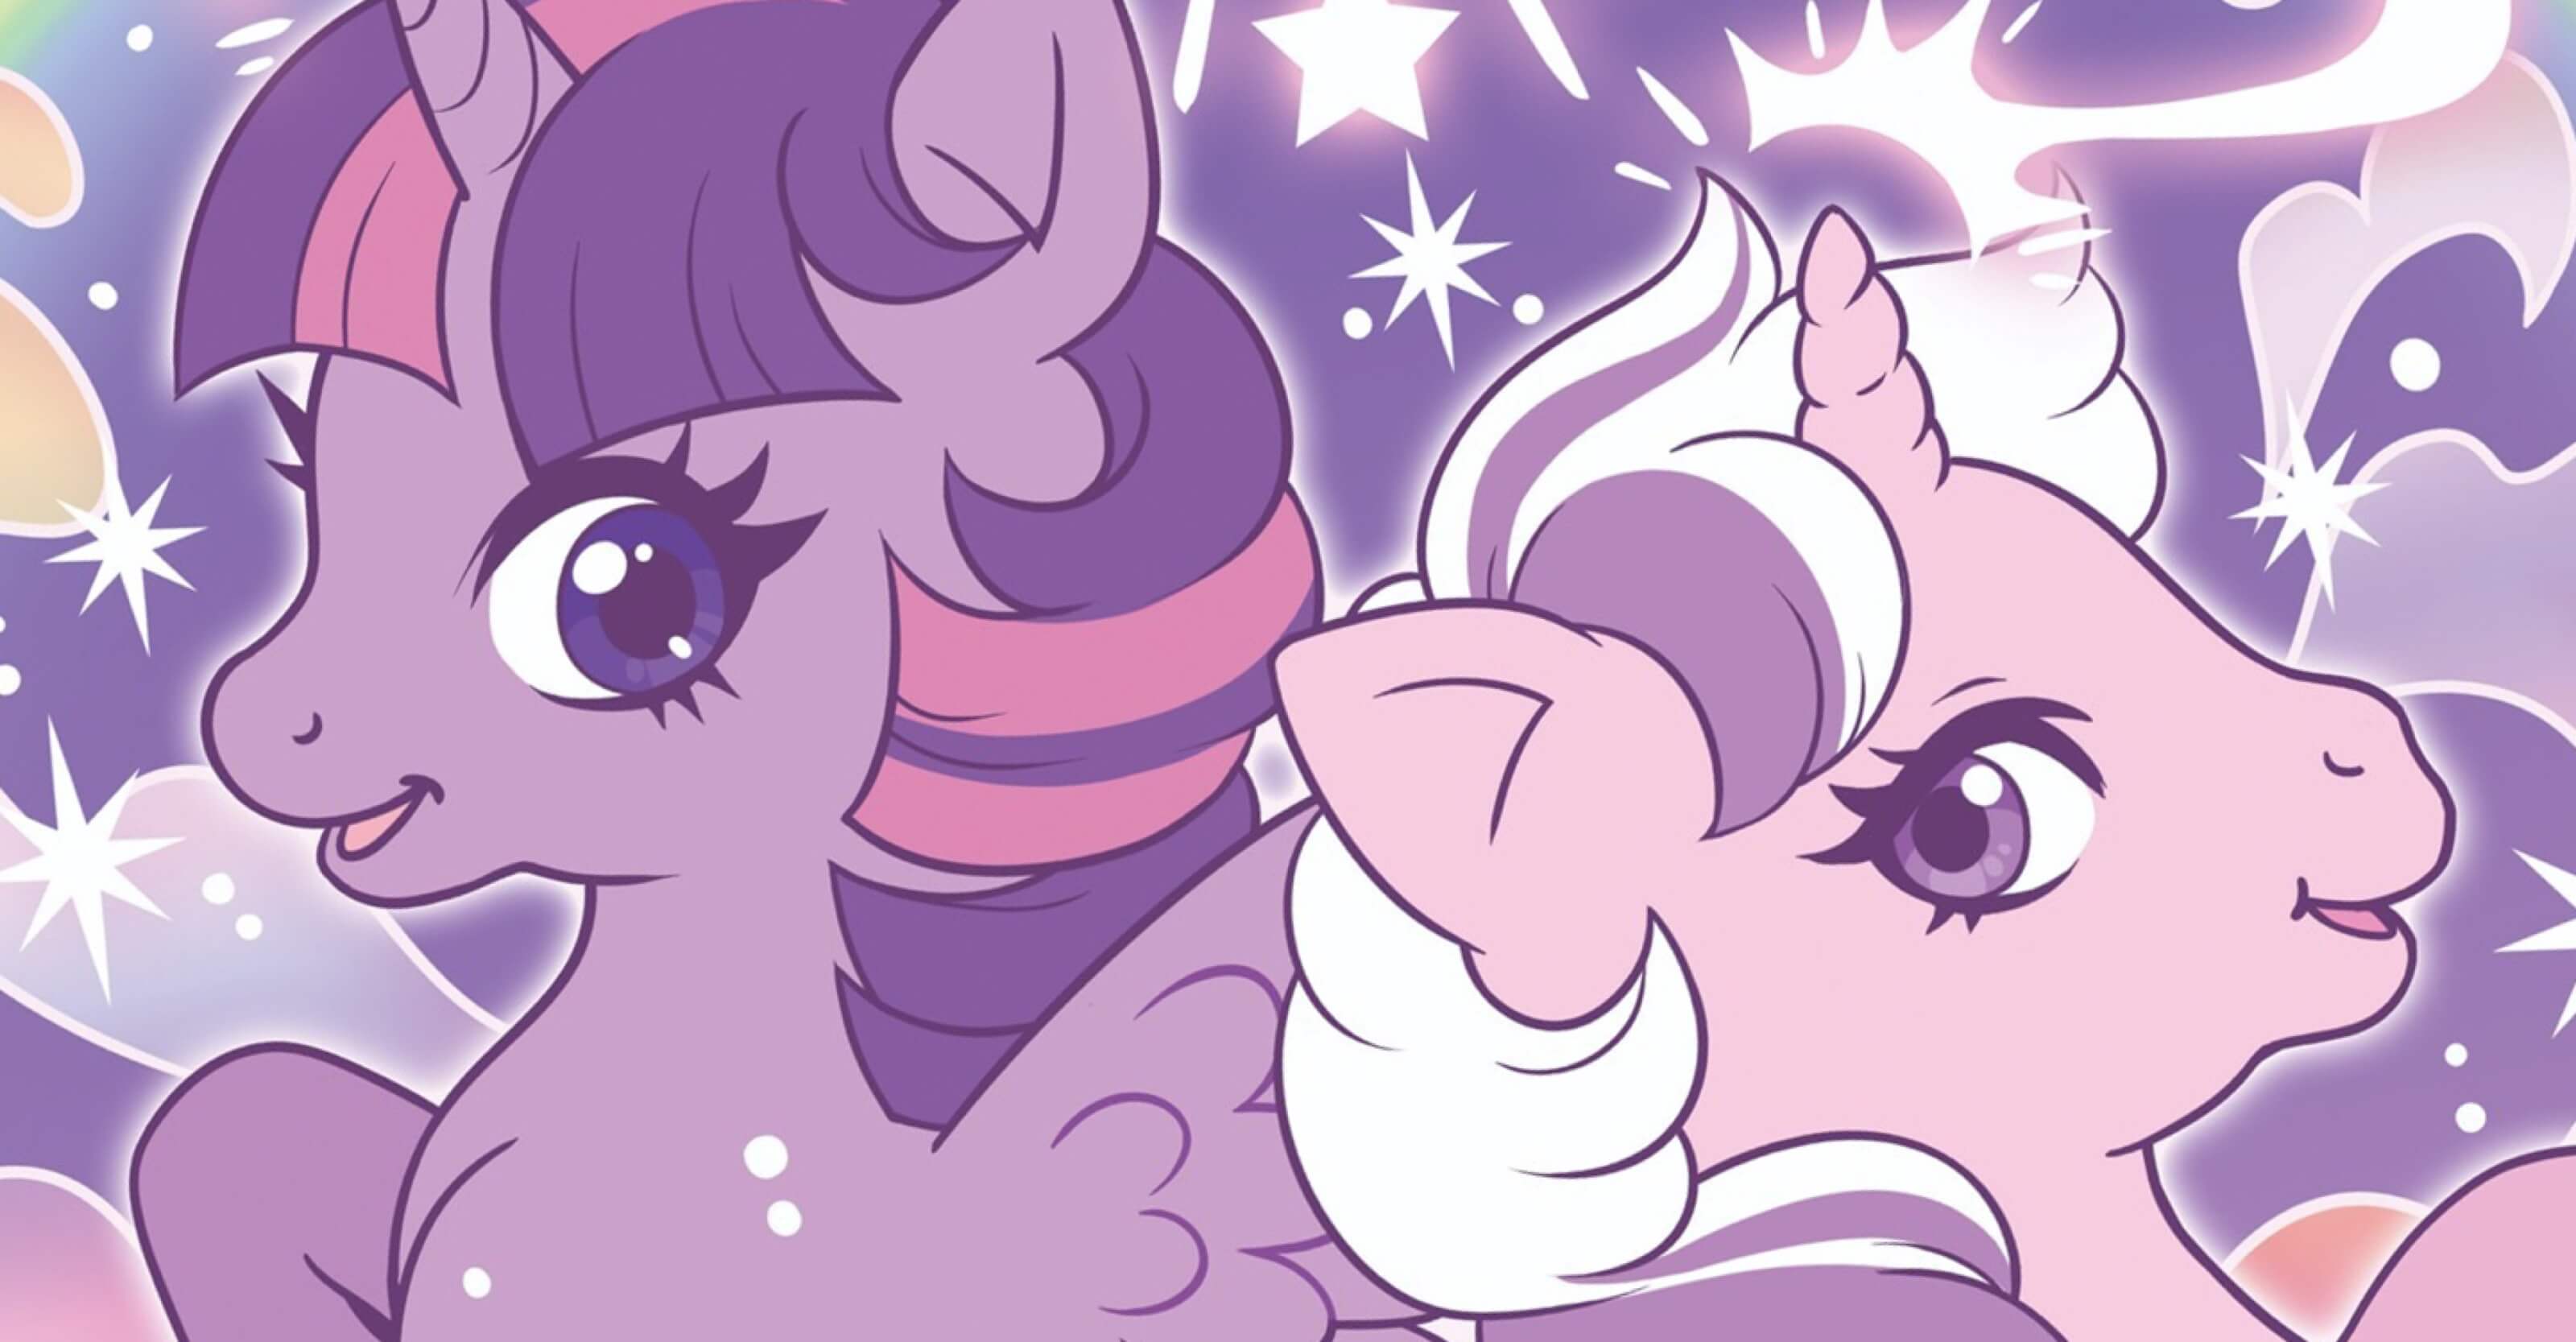 IDW Announces MY LITTLE PONY: GENERATIONS and Finale to Long-Running FRIENDSHIP IS MAGIC Comic Book